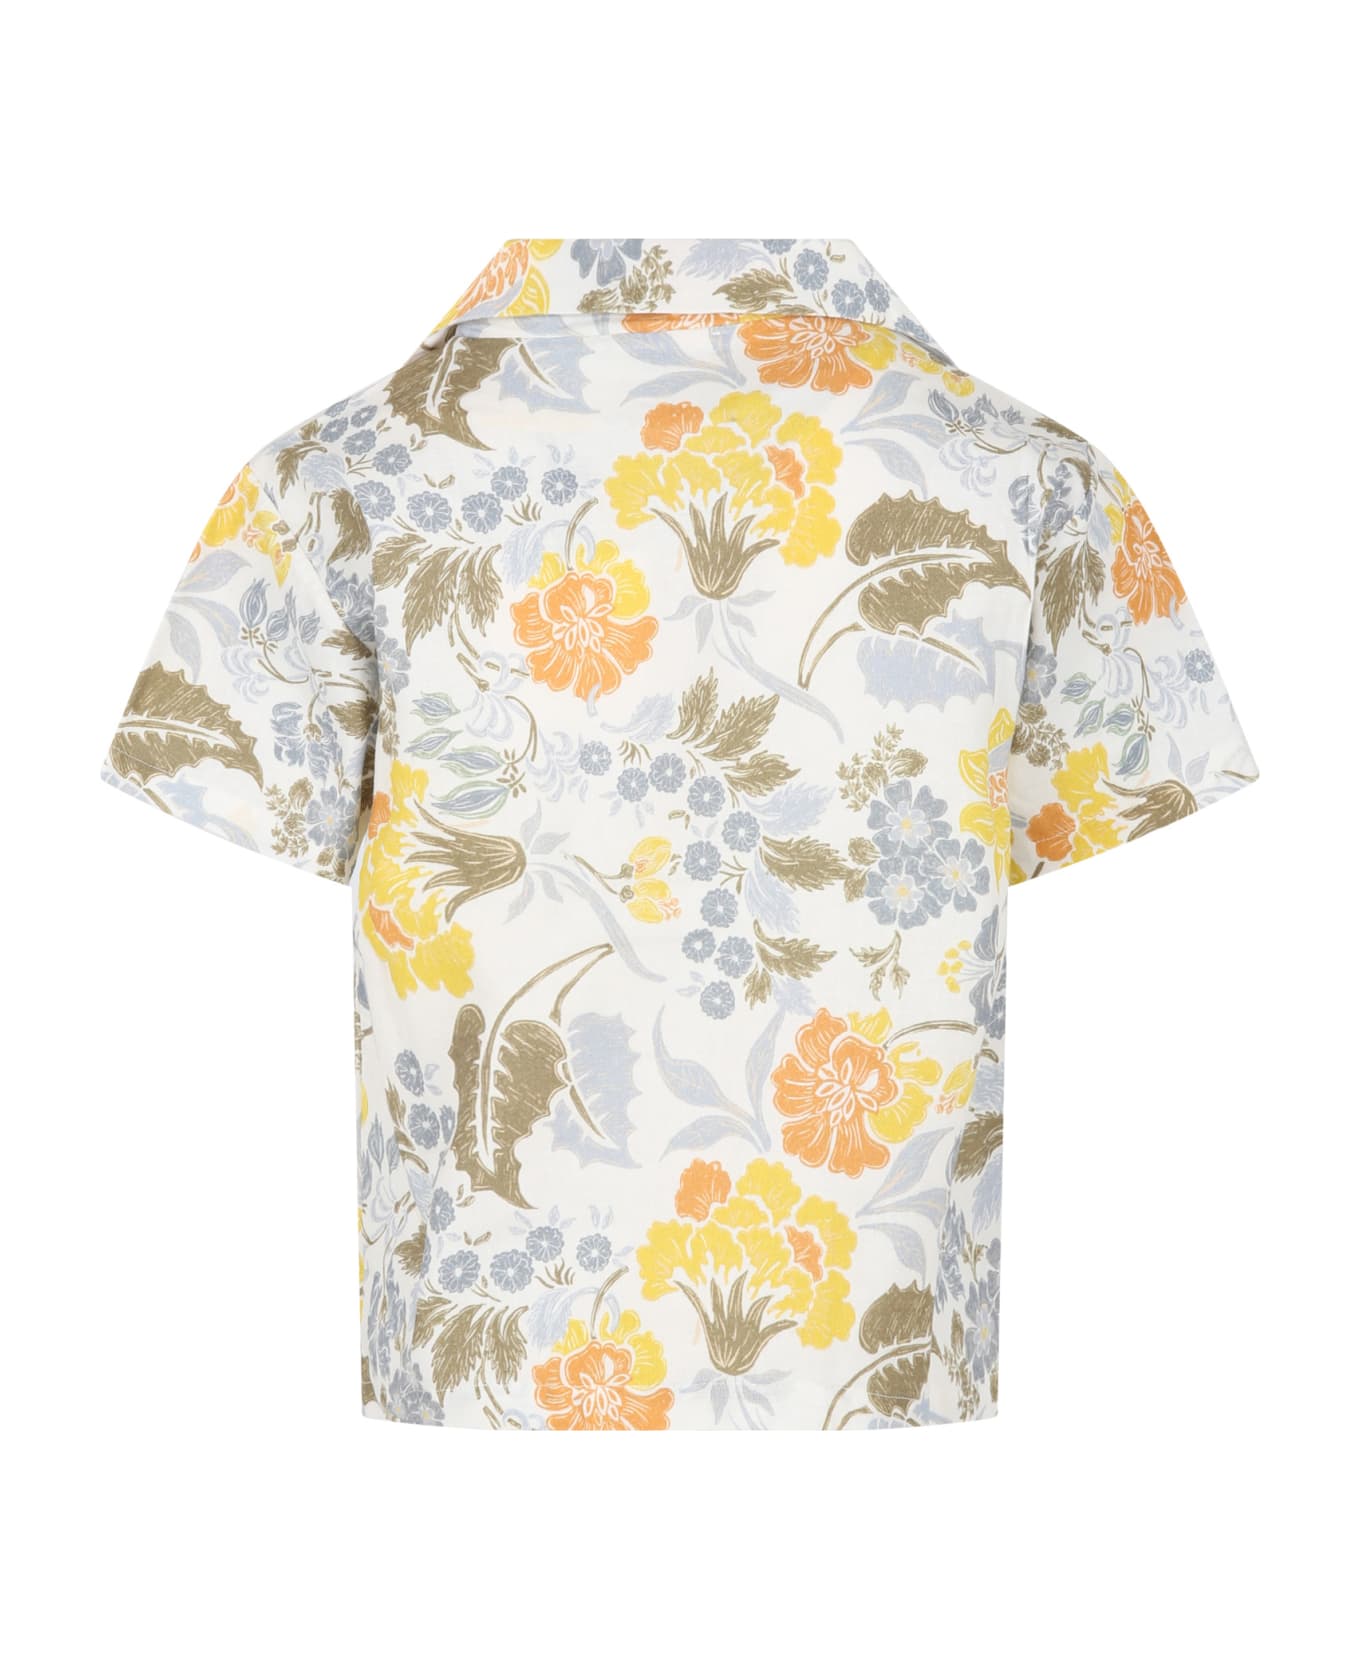 The New Society White Shirt For Boy With All-over Flowers - Multicolor